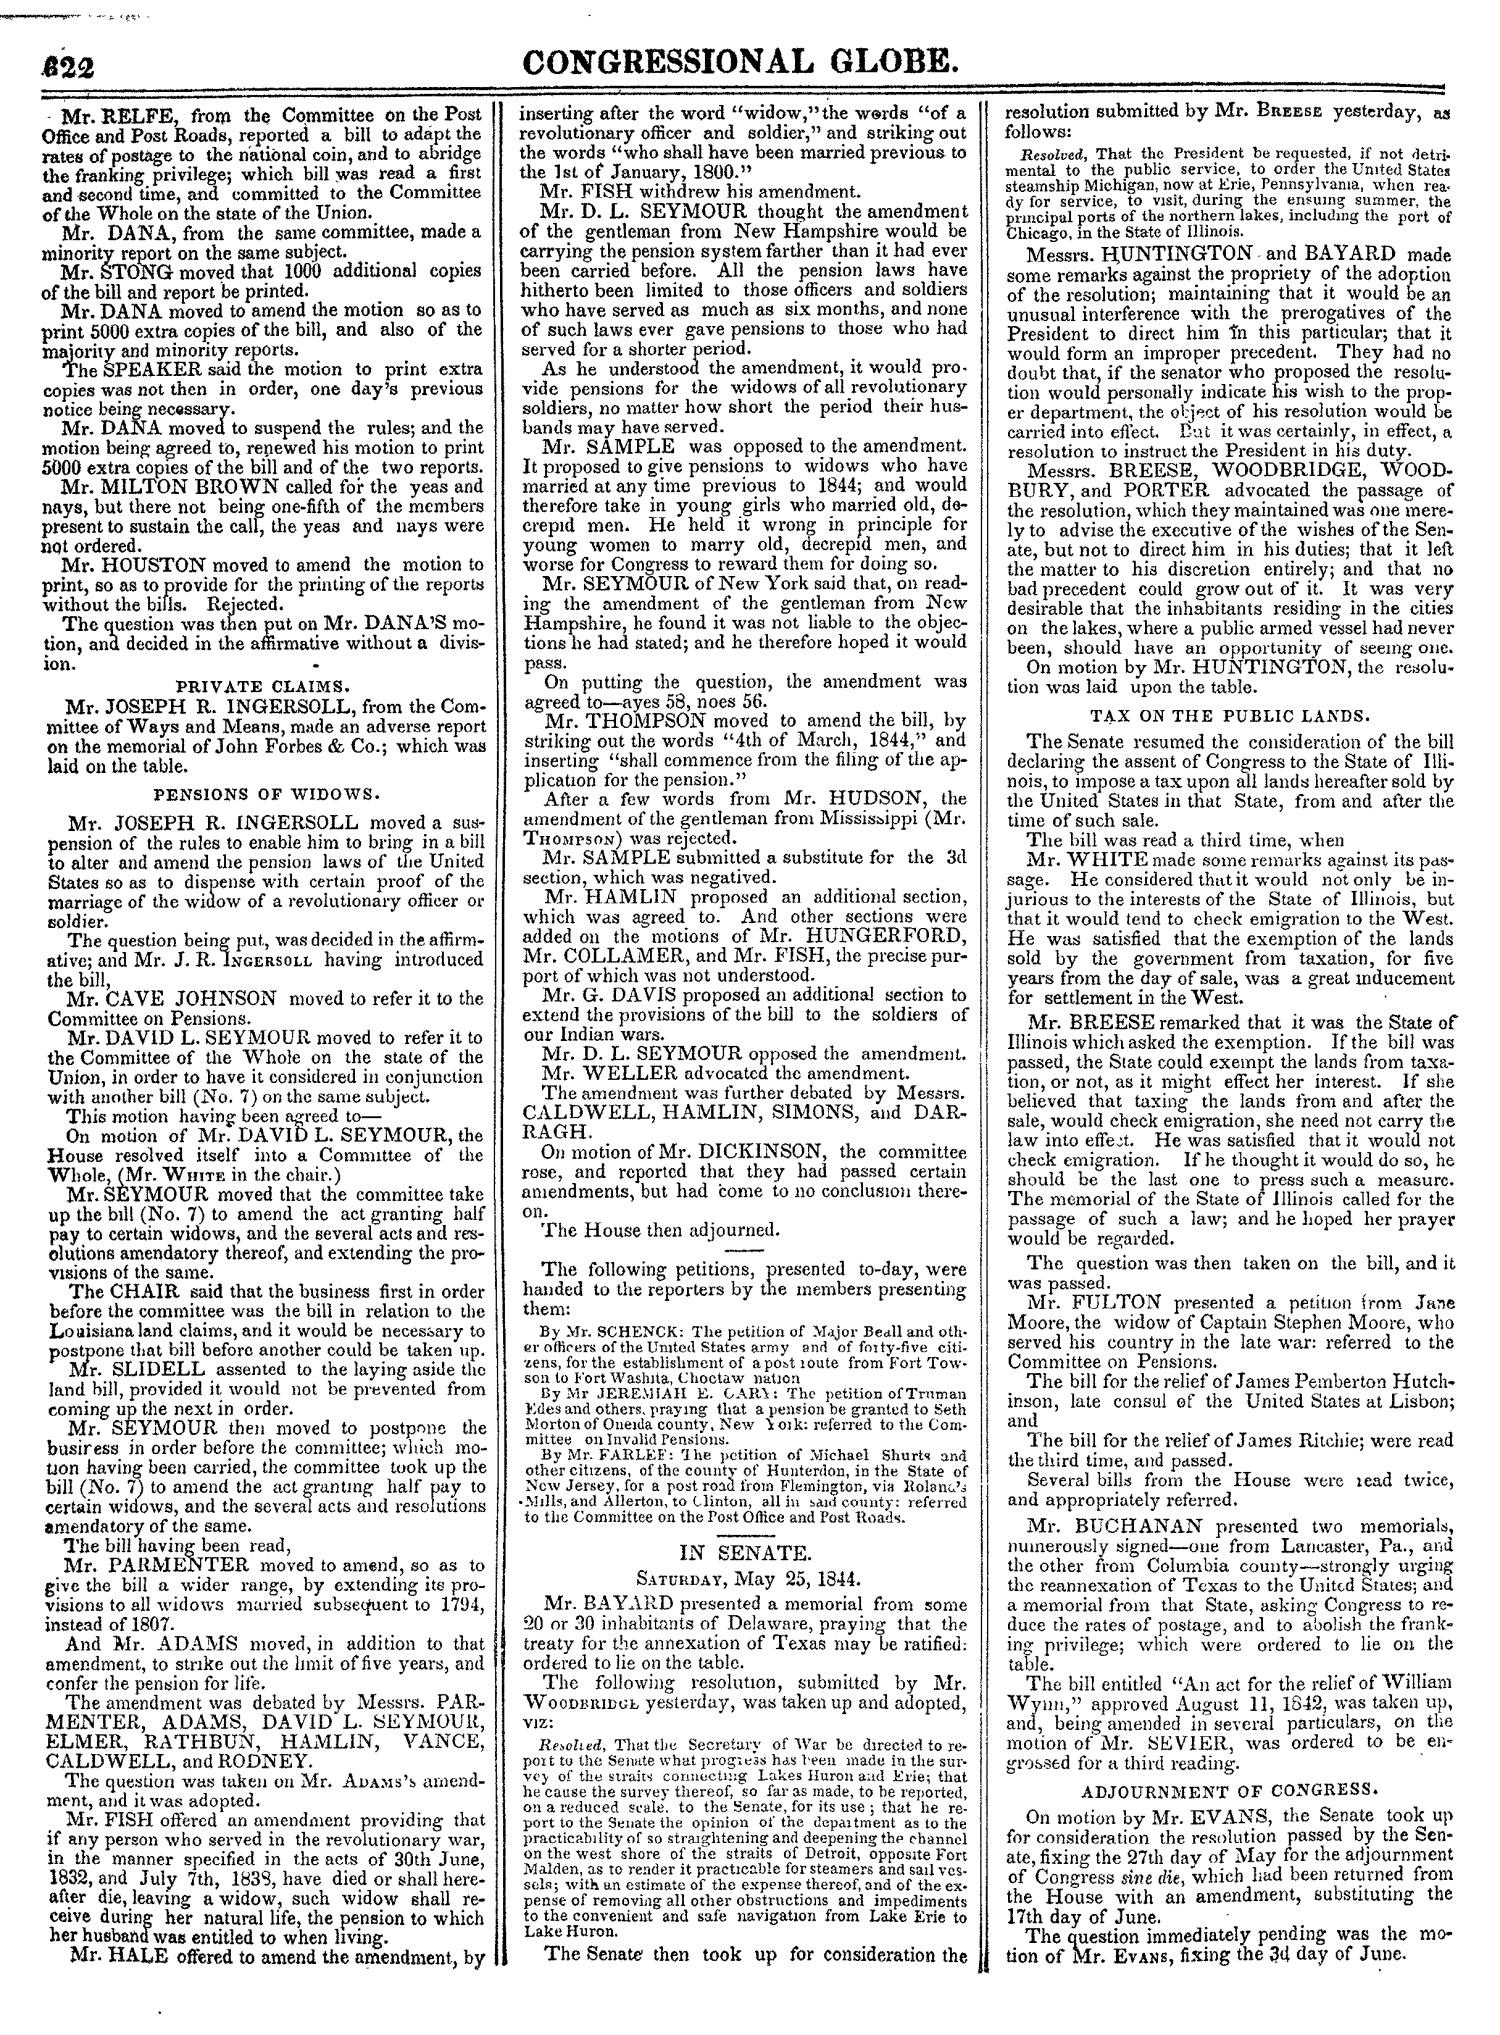 The Congressional Globe, Volume 13, Part 1: Twenty-Eighth Congress, First Session
                                                
                                                    622
                                                